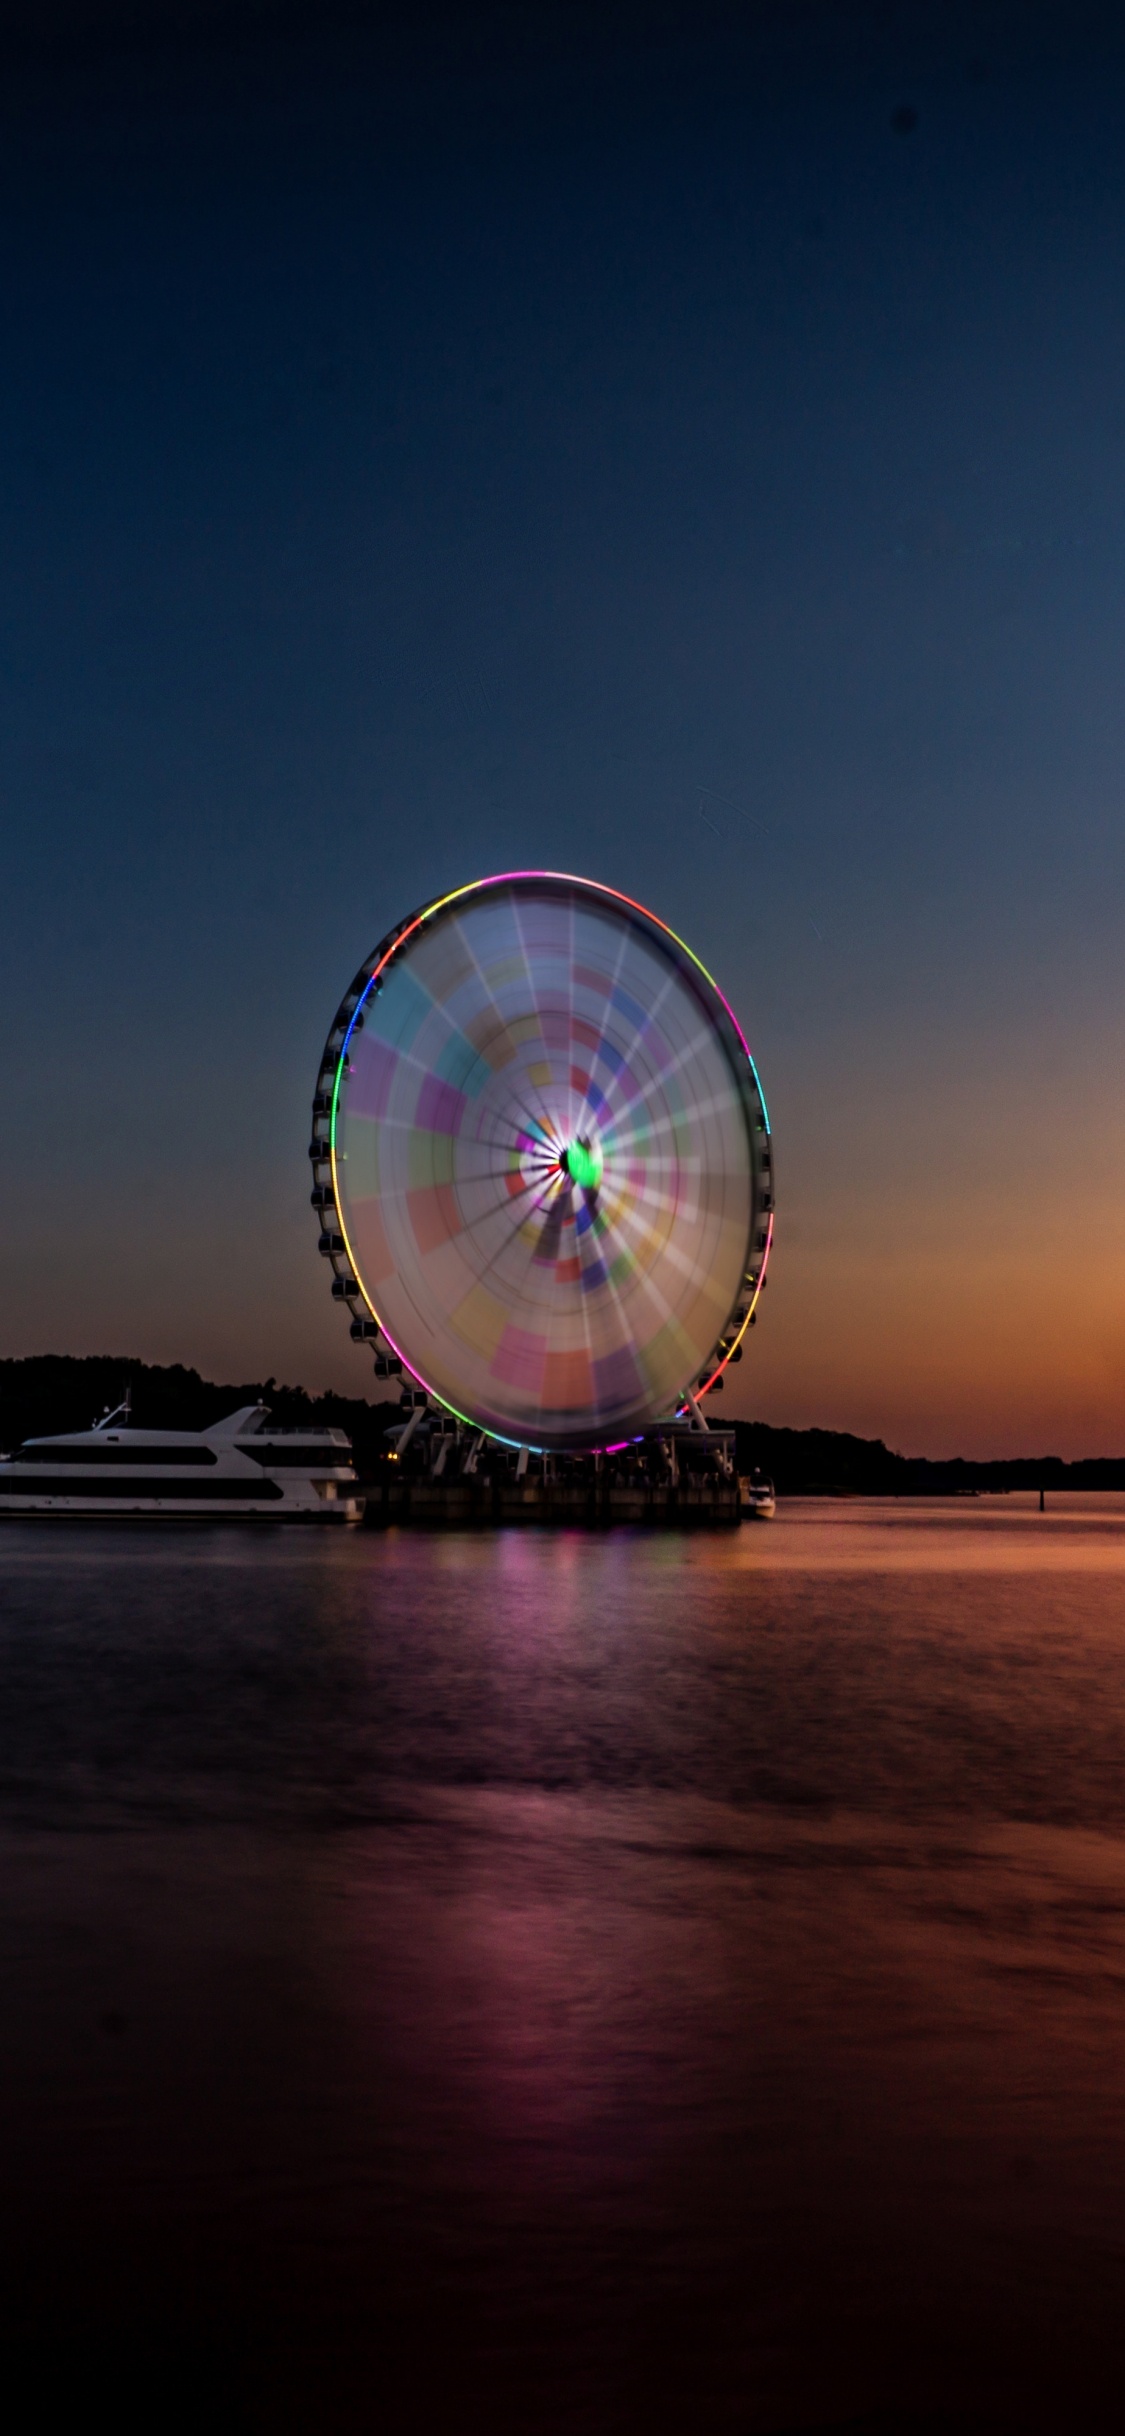 Ferris Wheel Near Body of Water During Night Time. Wallpaper in 1125x2436 Resolution